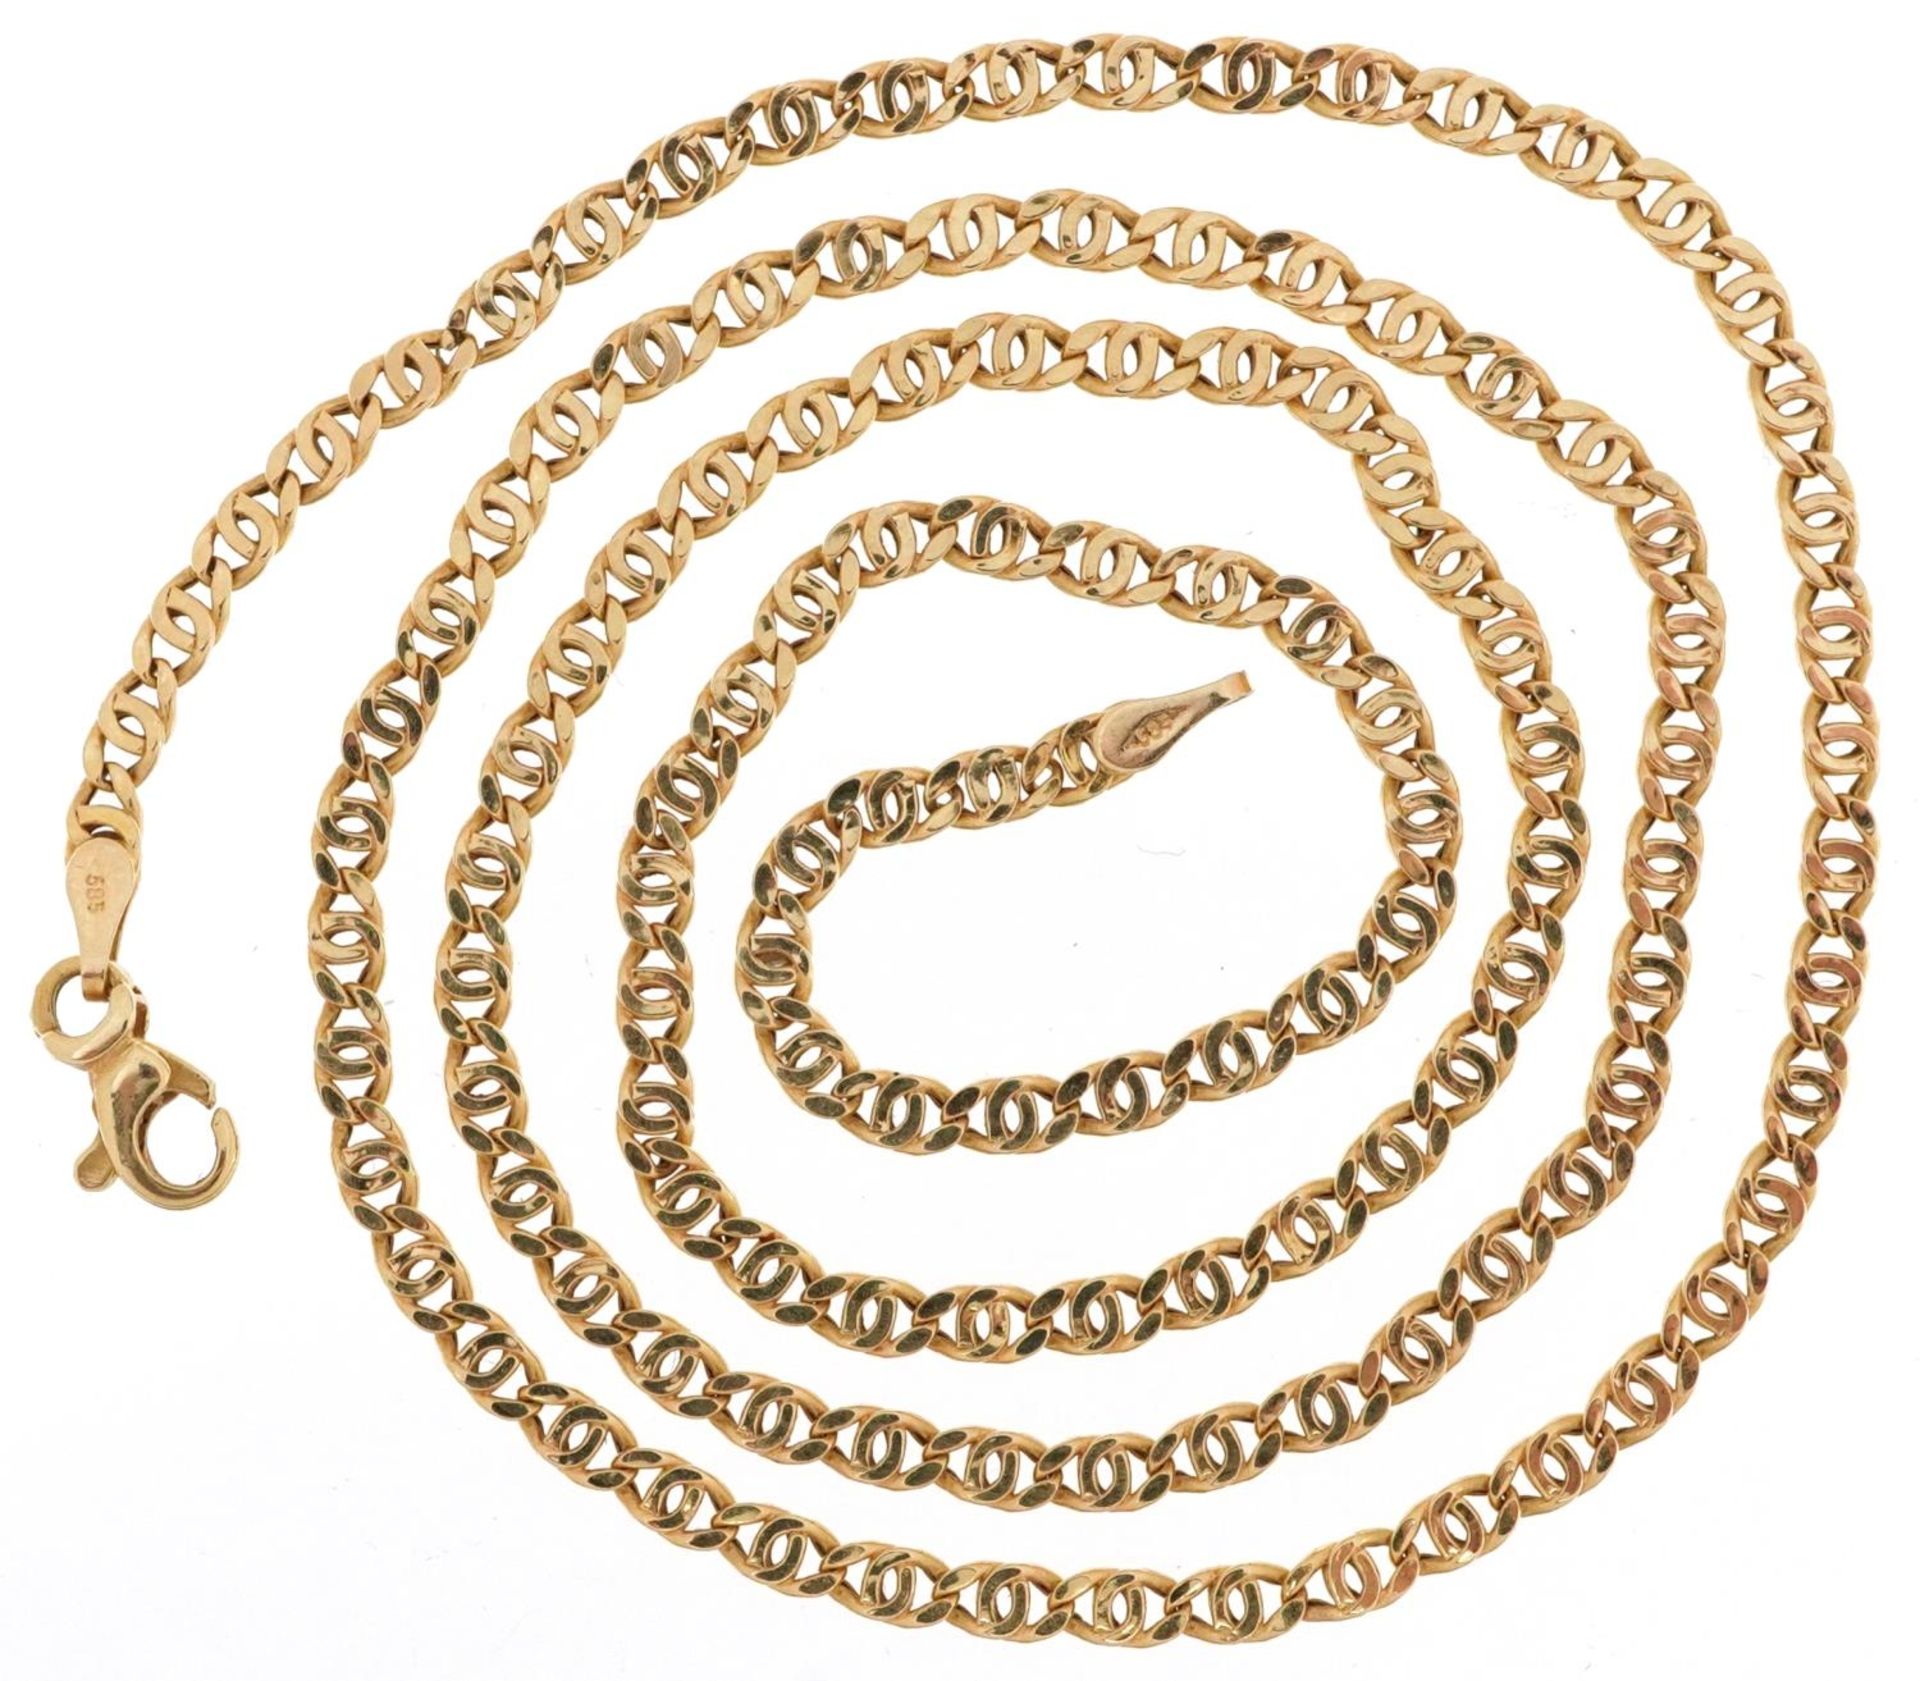 14ct gold ova link necklace, 50cm in length, 4.2g - Image 2 of 3